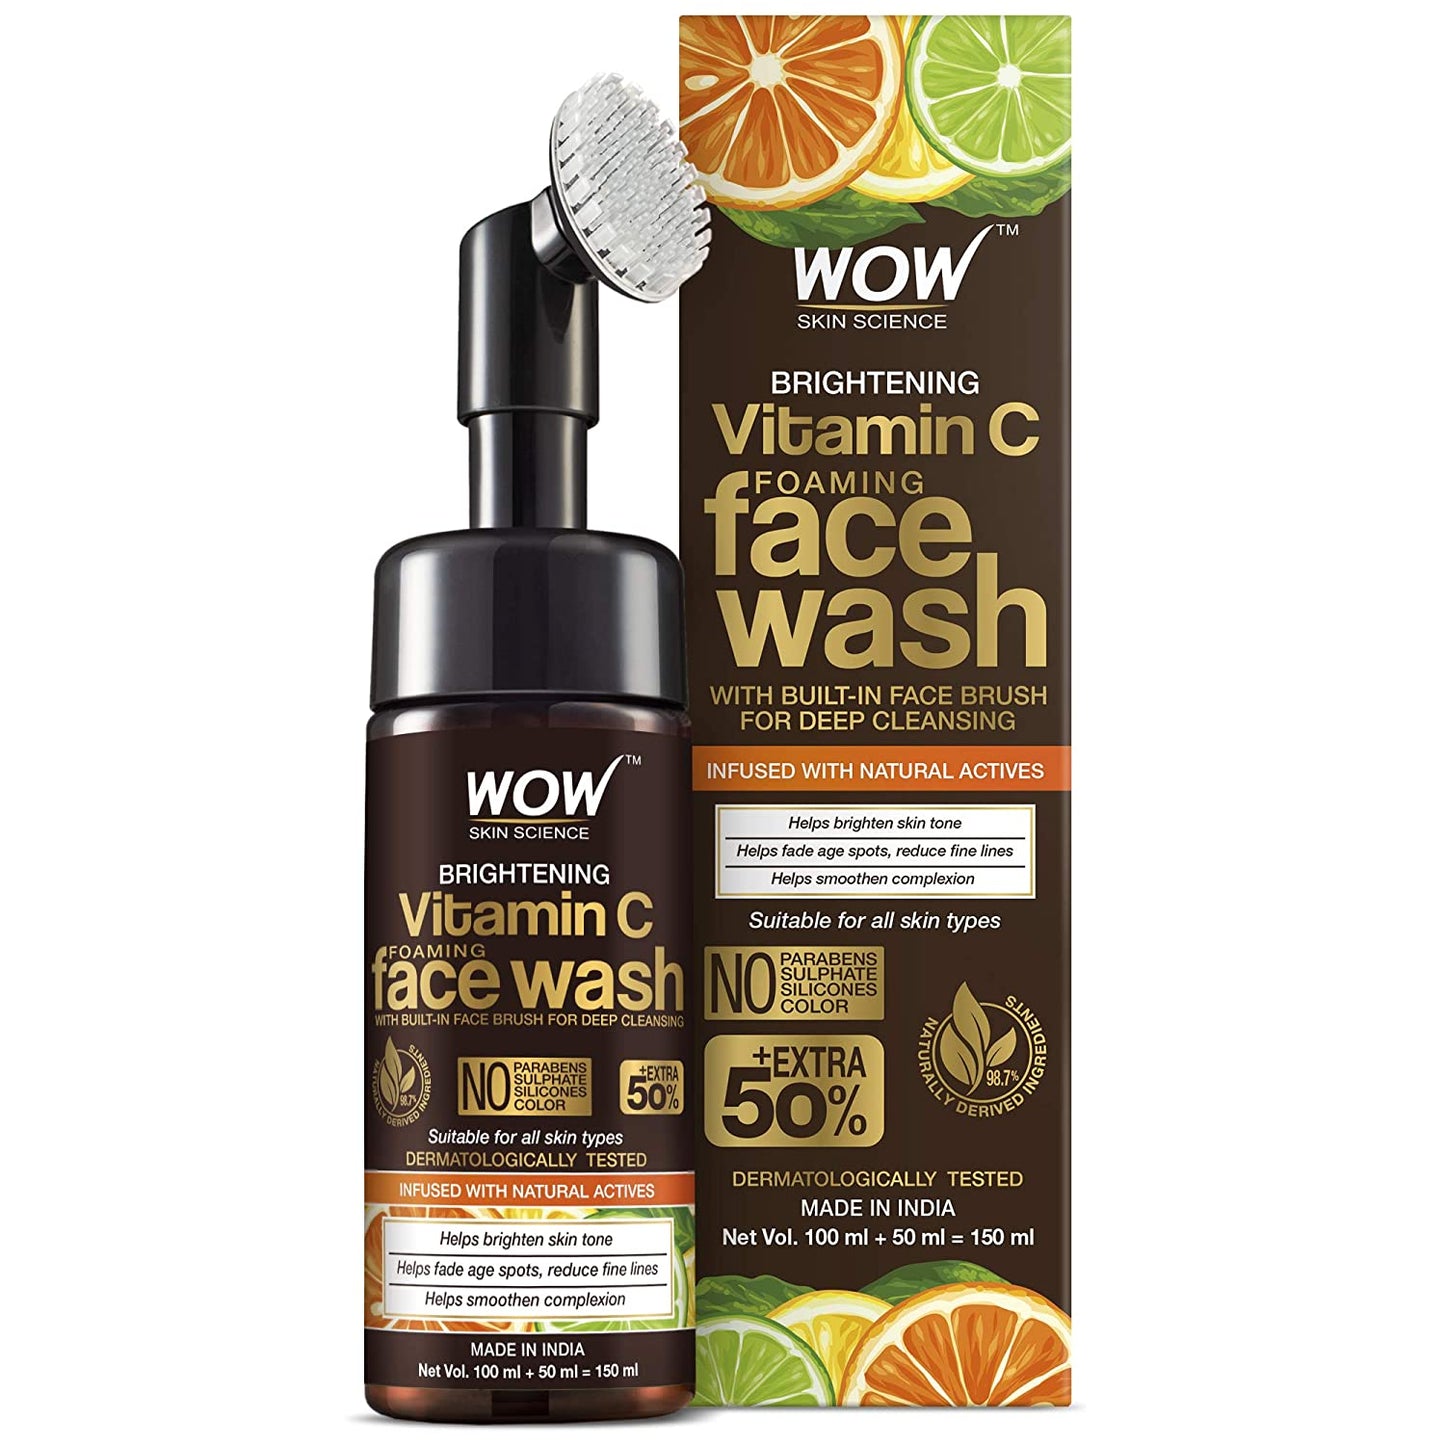 WOW Skin Science Brightening Vitamin C Foaming Face Wash with Built-In Face Brush - 150ml